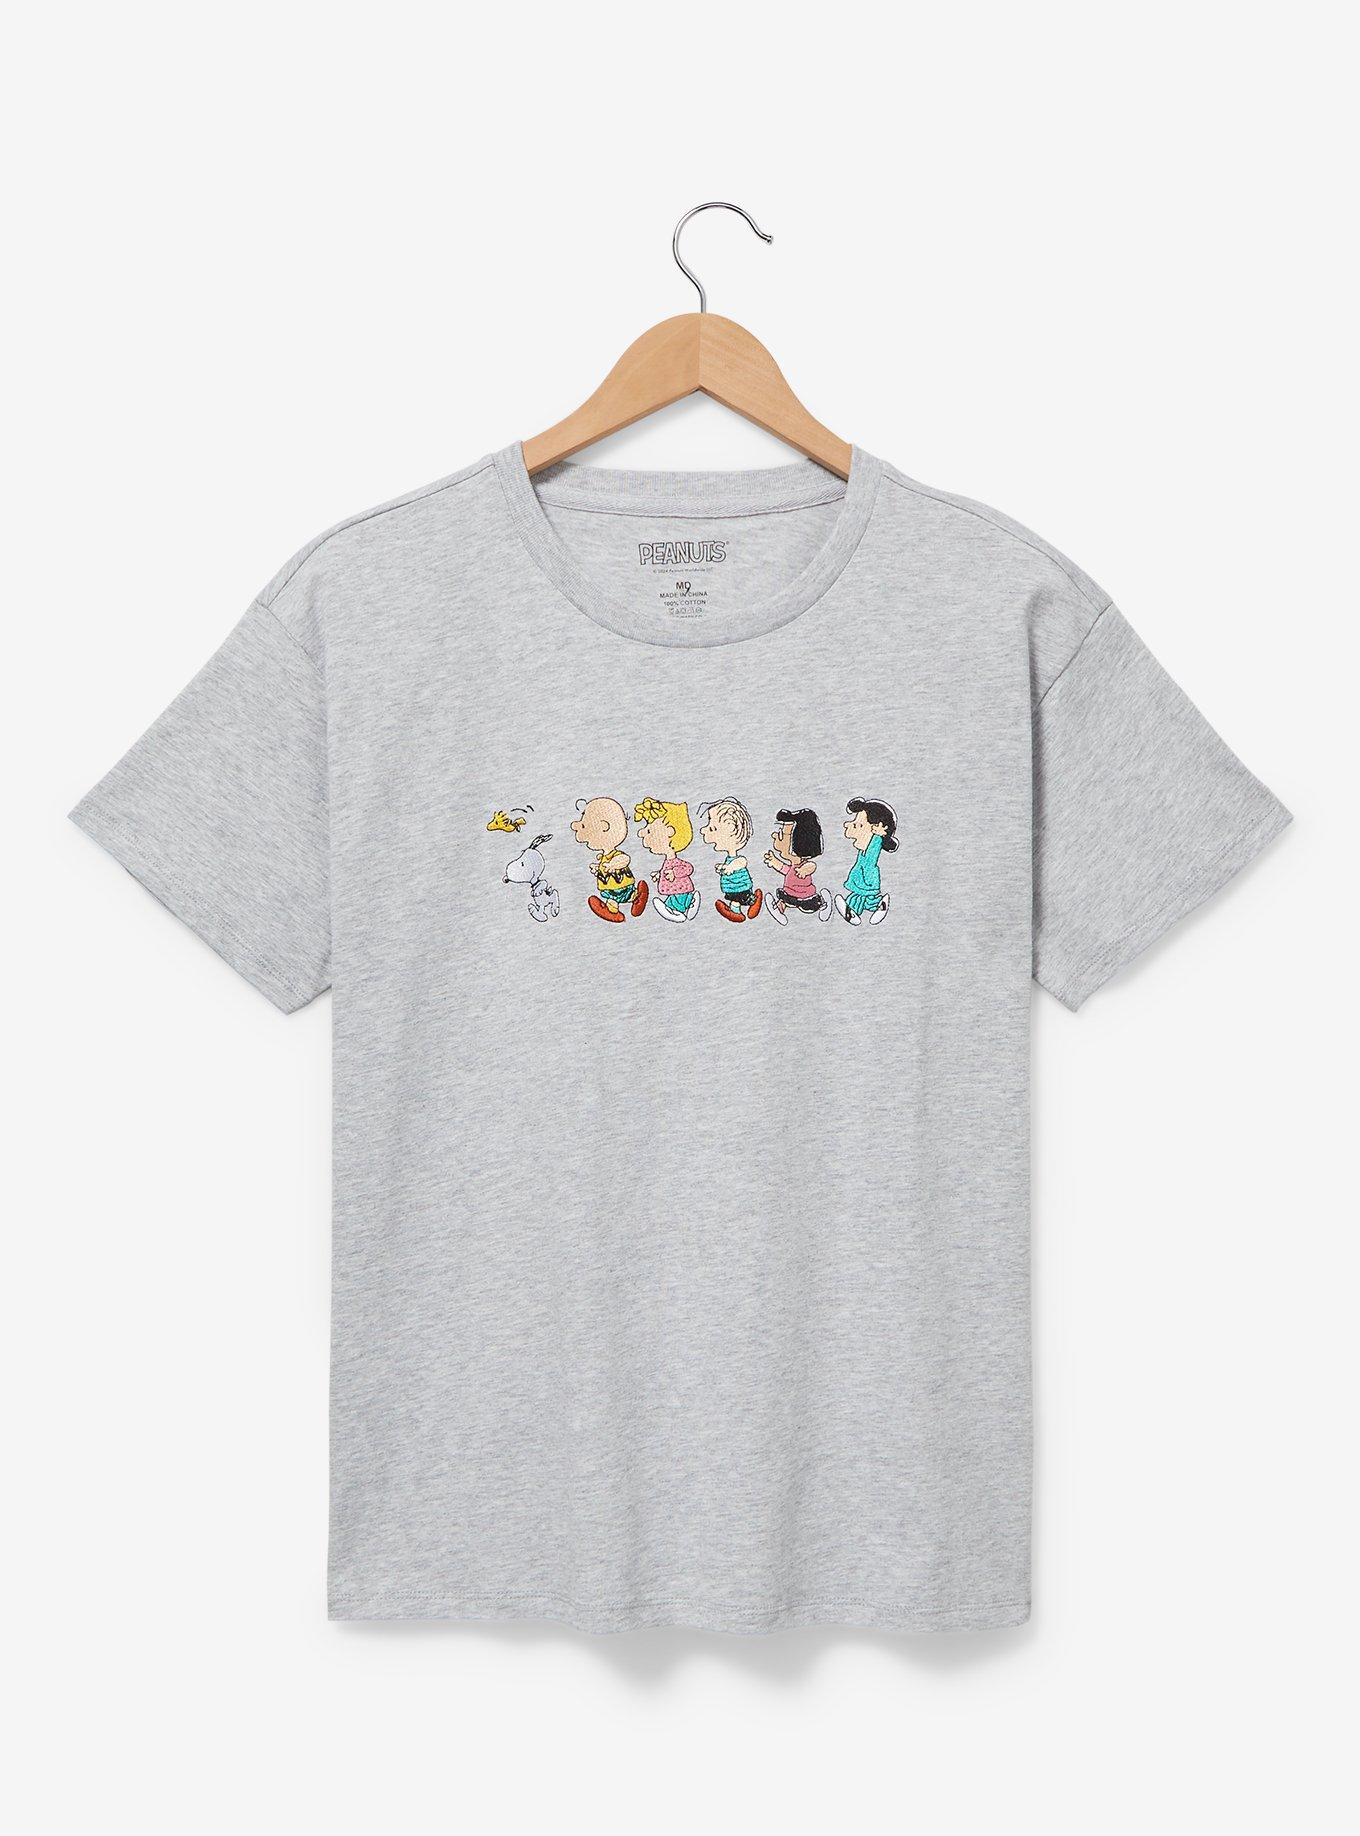 Peanuts Characters Running Women's T-Shirt - BoxLunch Exclusive, , hi-res